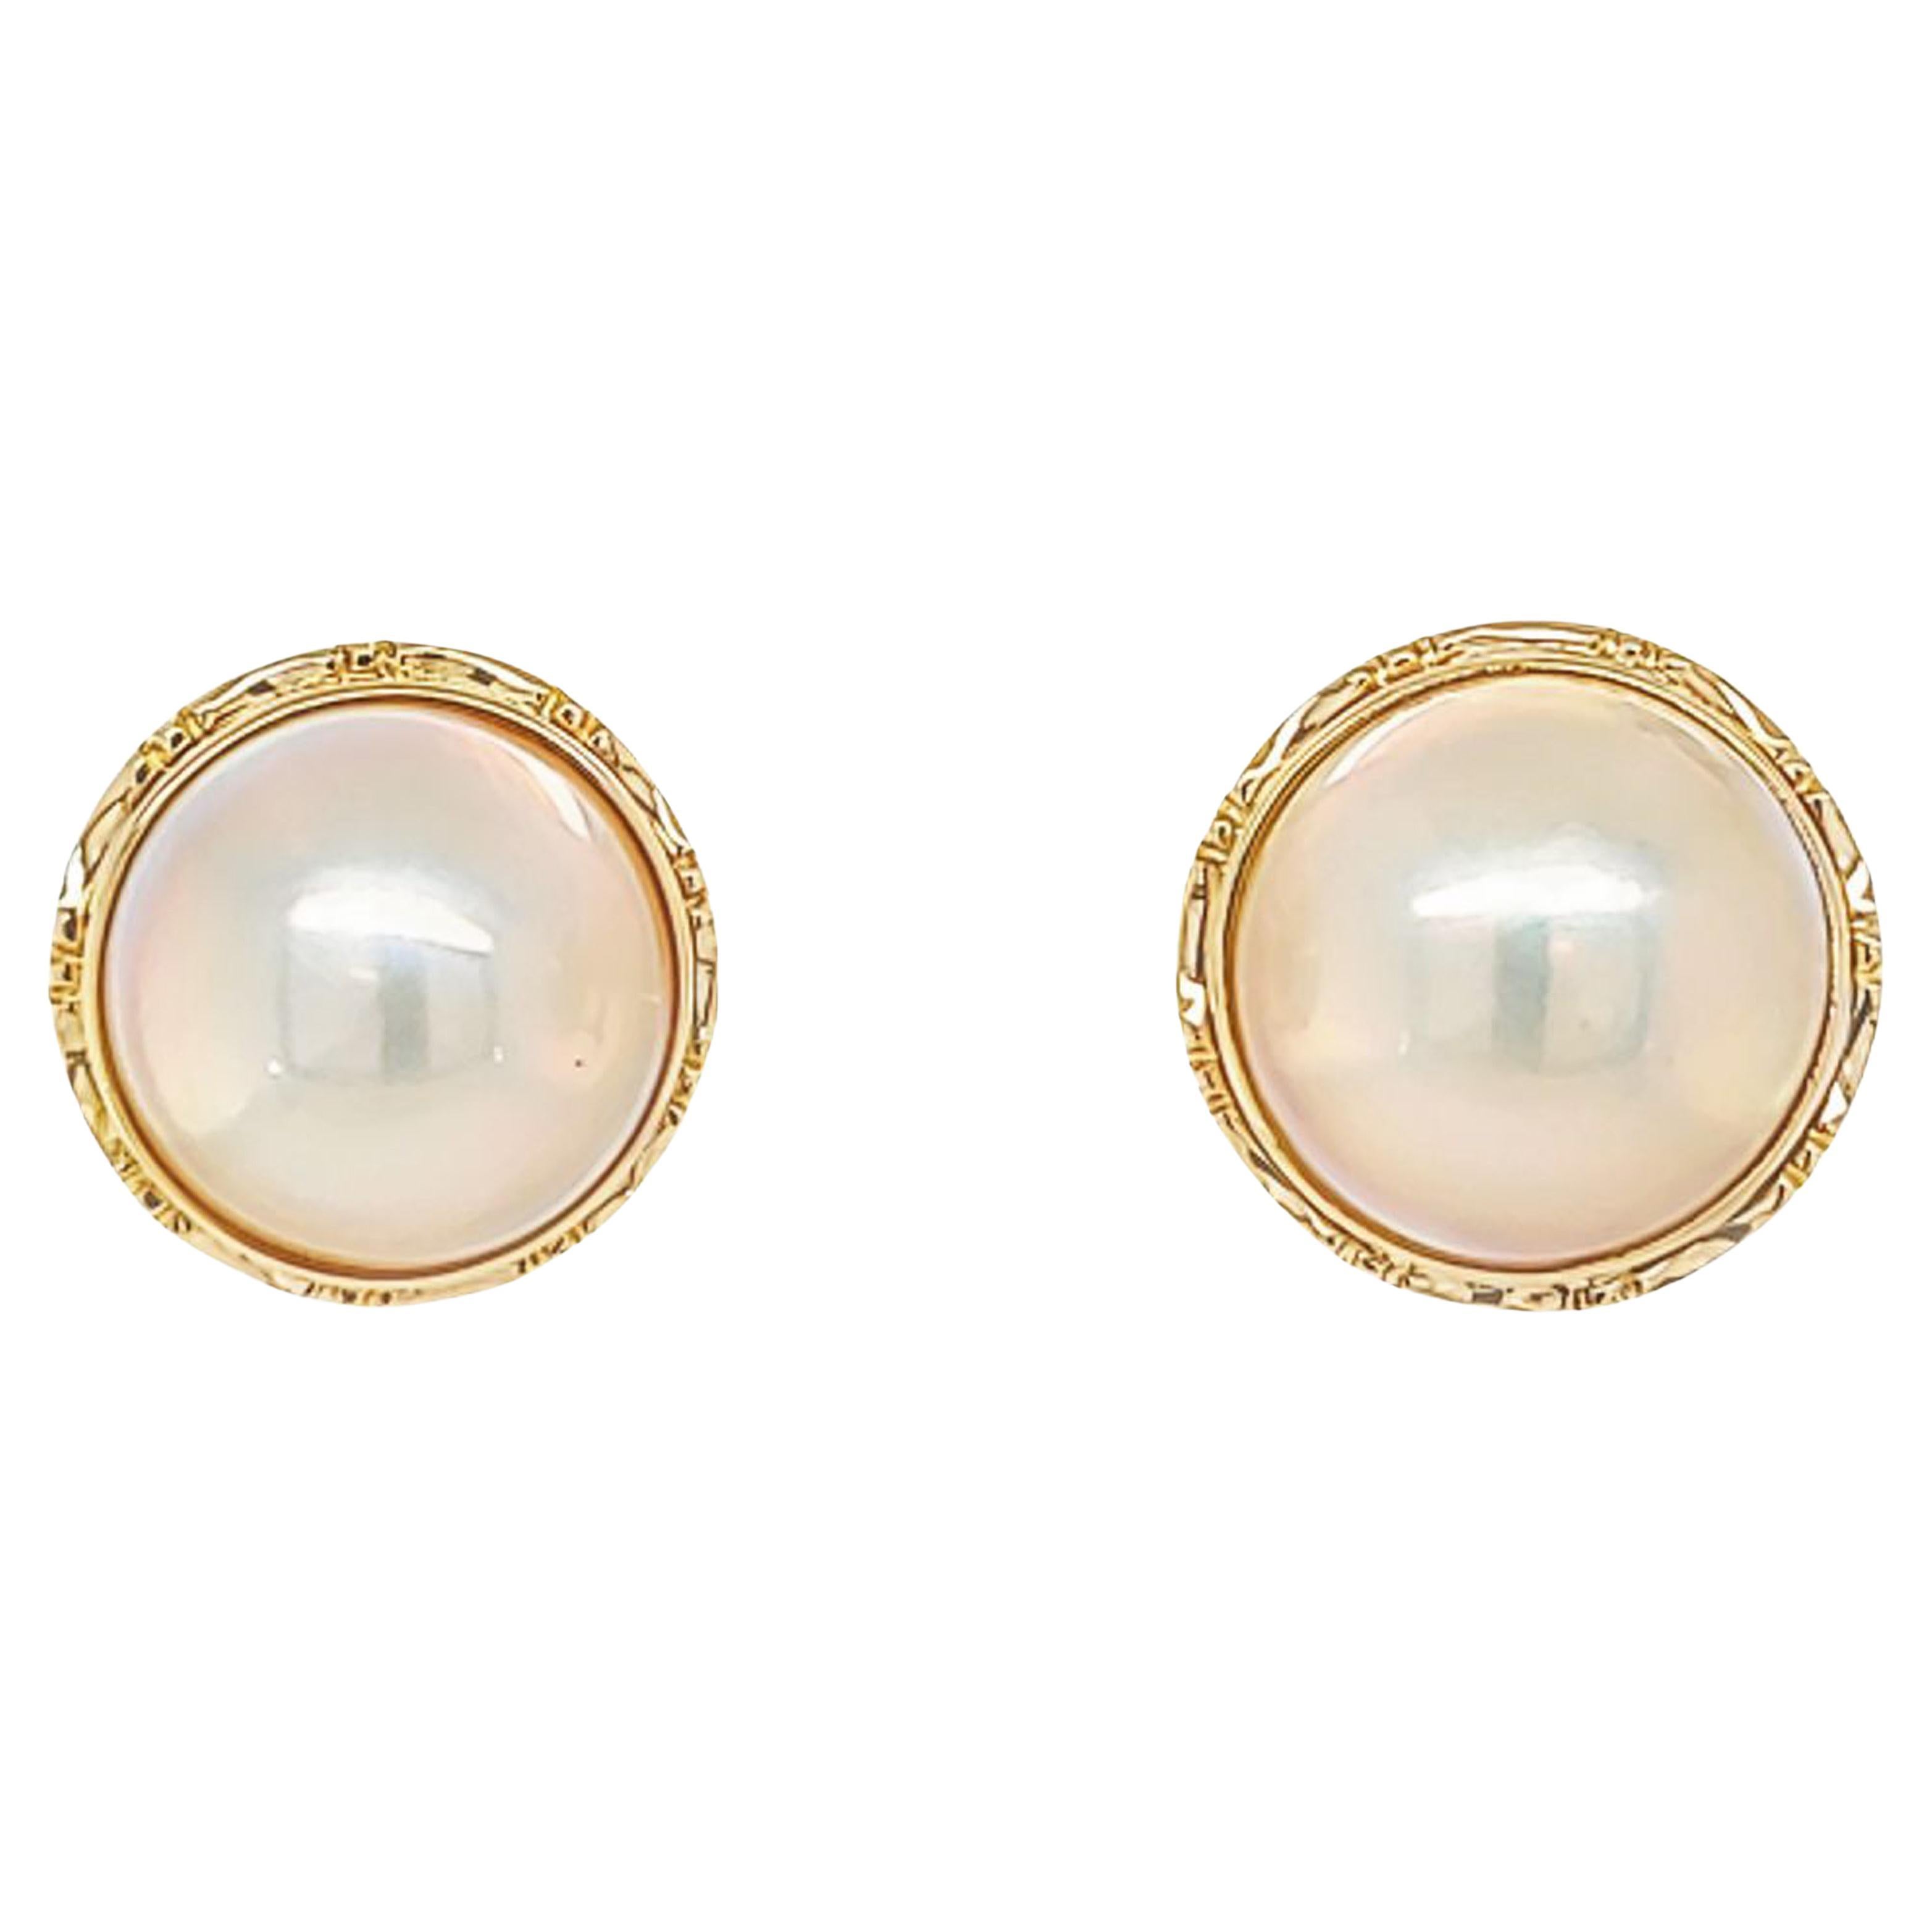 Round Mabe Pearl Earrings